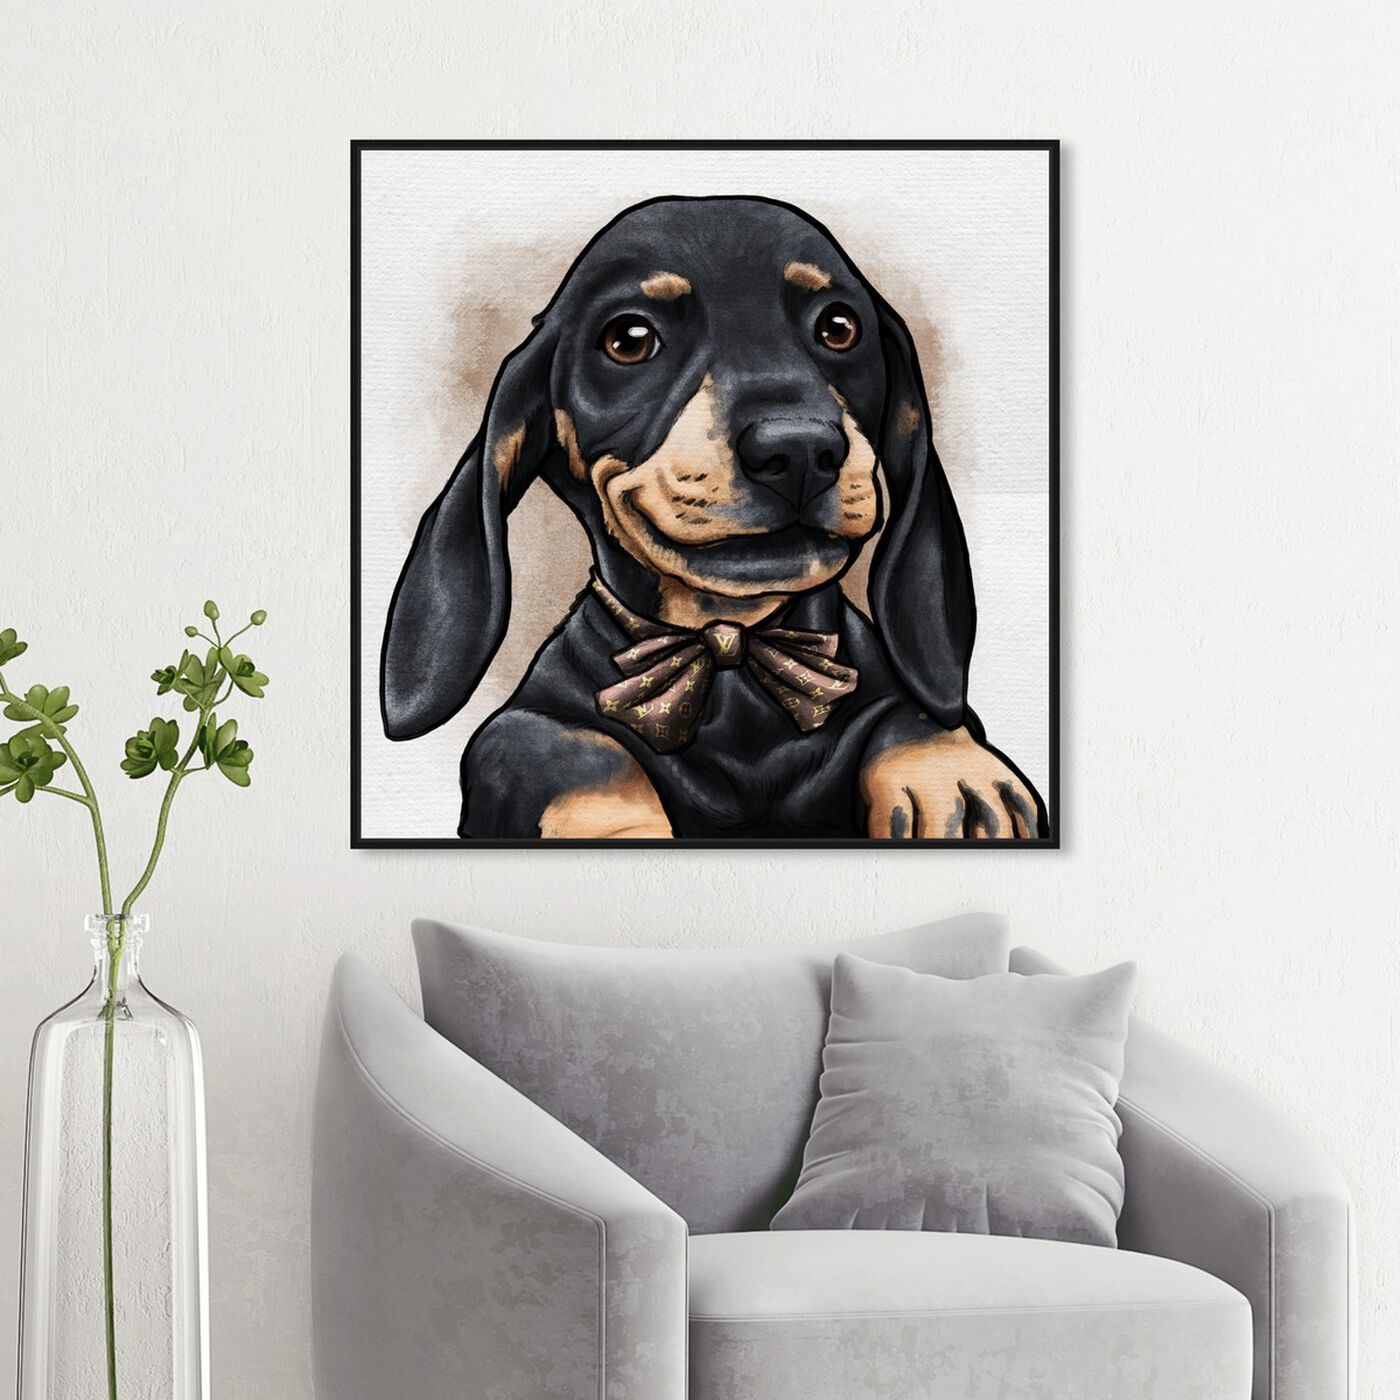 Hanging view of Dapper Dachshund featuring animals and dogs and puppies art.